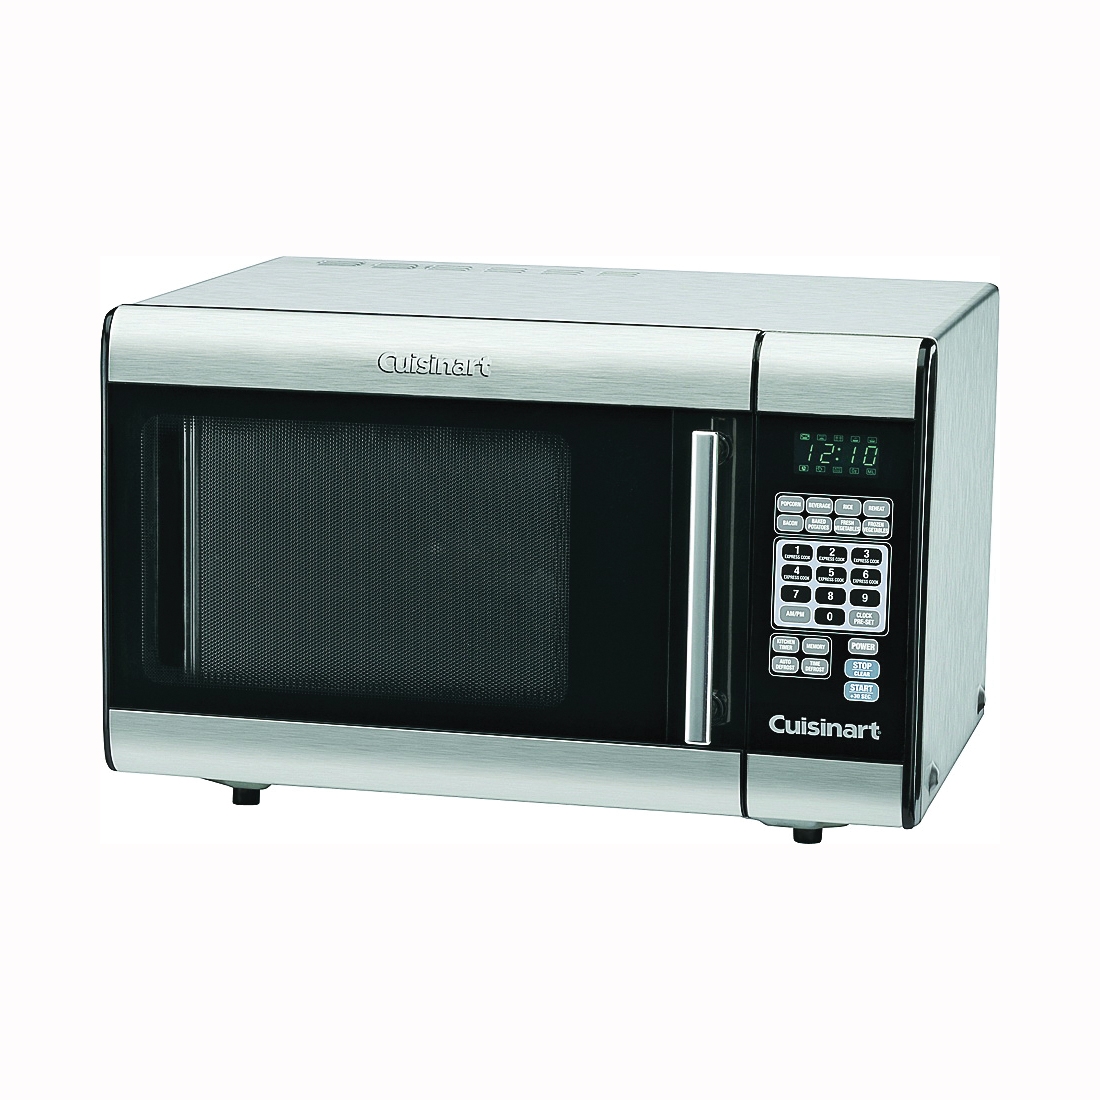 CMW-100 Microwave Oven, 1 cu-ft Capacity, 1000 W, Stainless Steel, Black